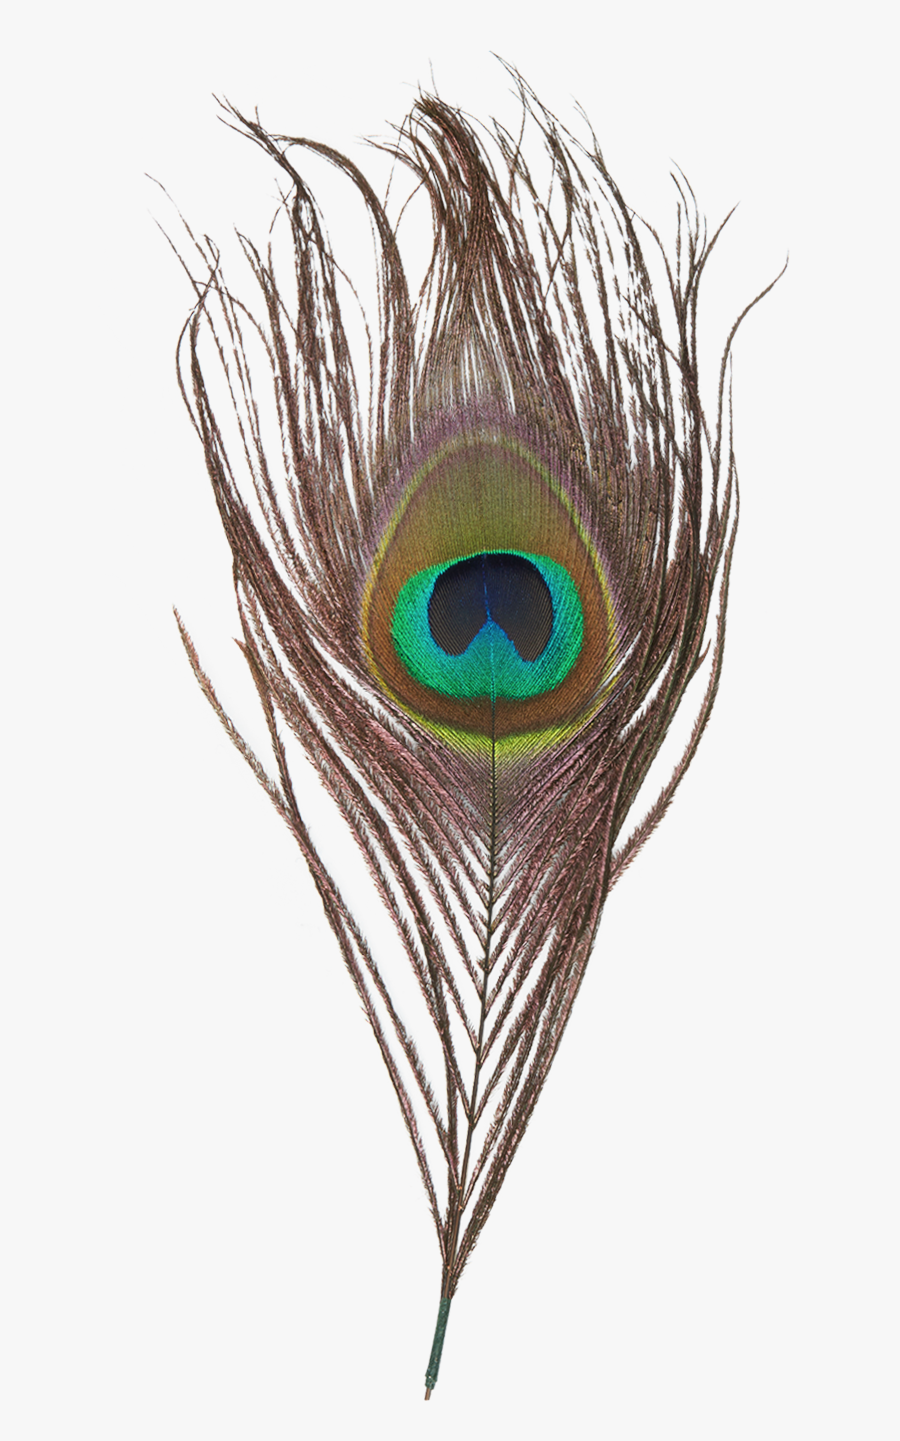 Peacock Feather Png Transparent Image Feather Image